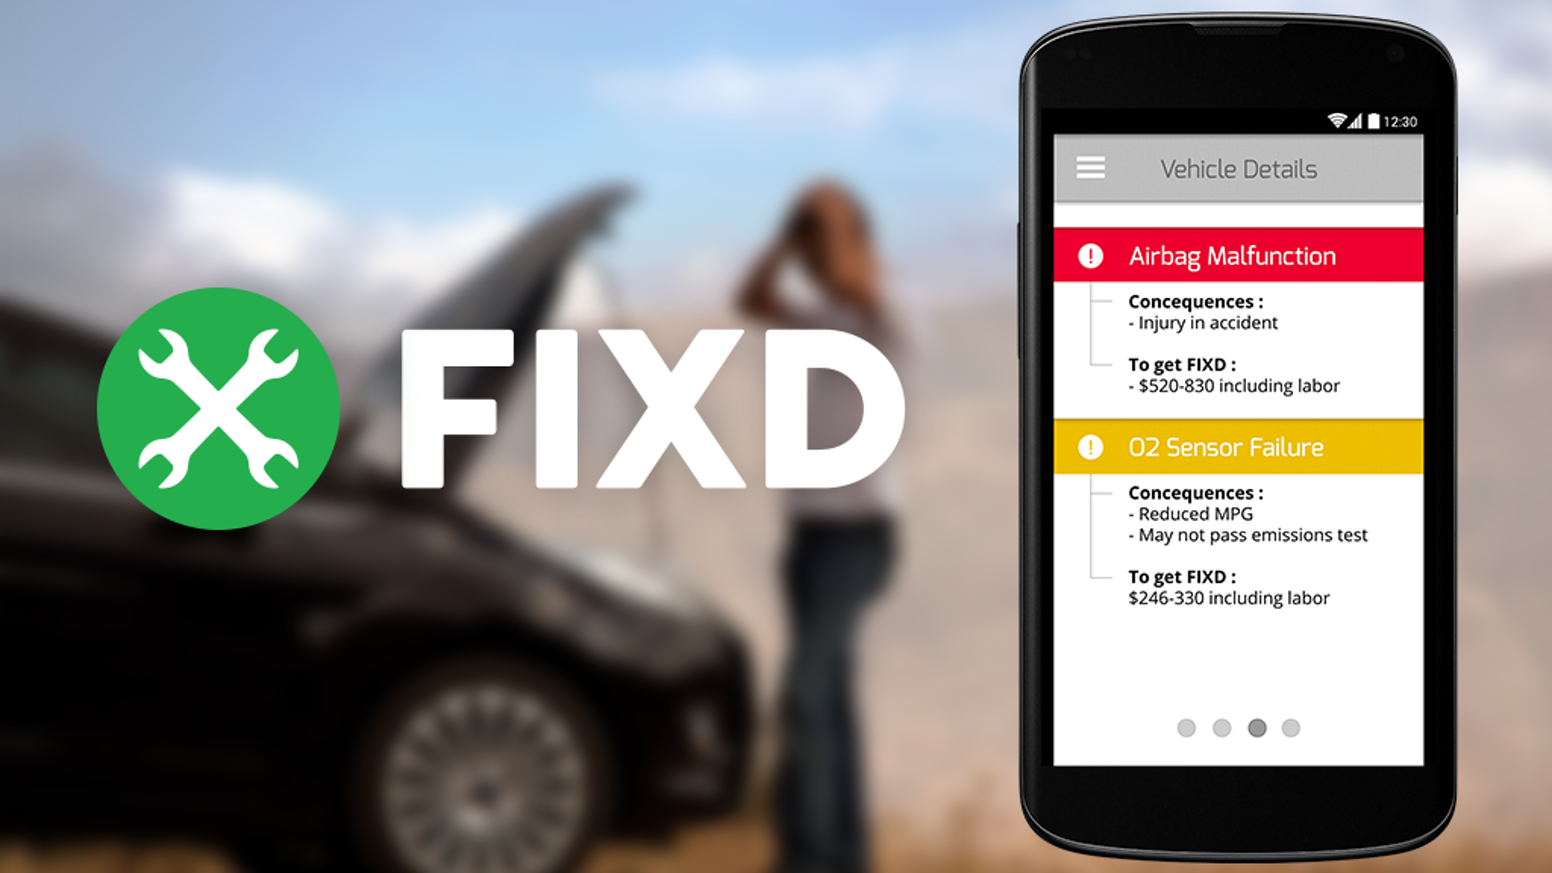 FIXD – Help Prevent Costly Car Repairs?